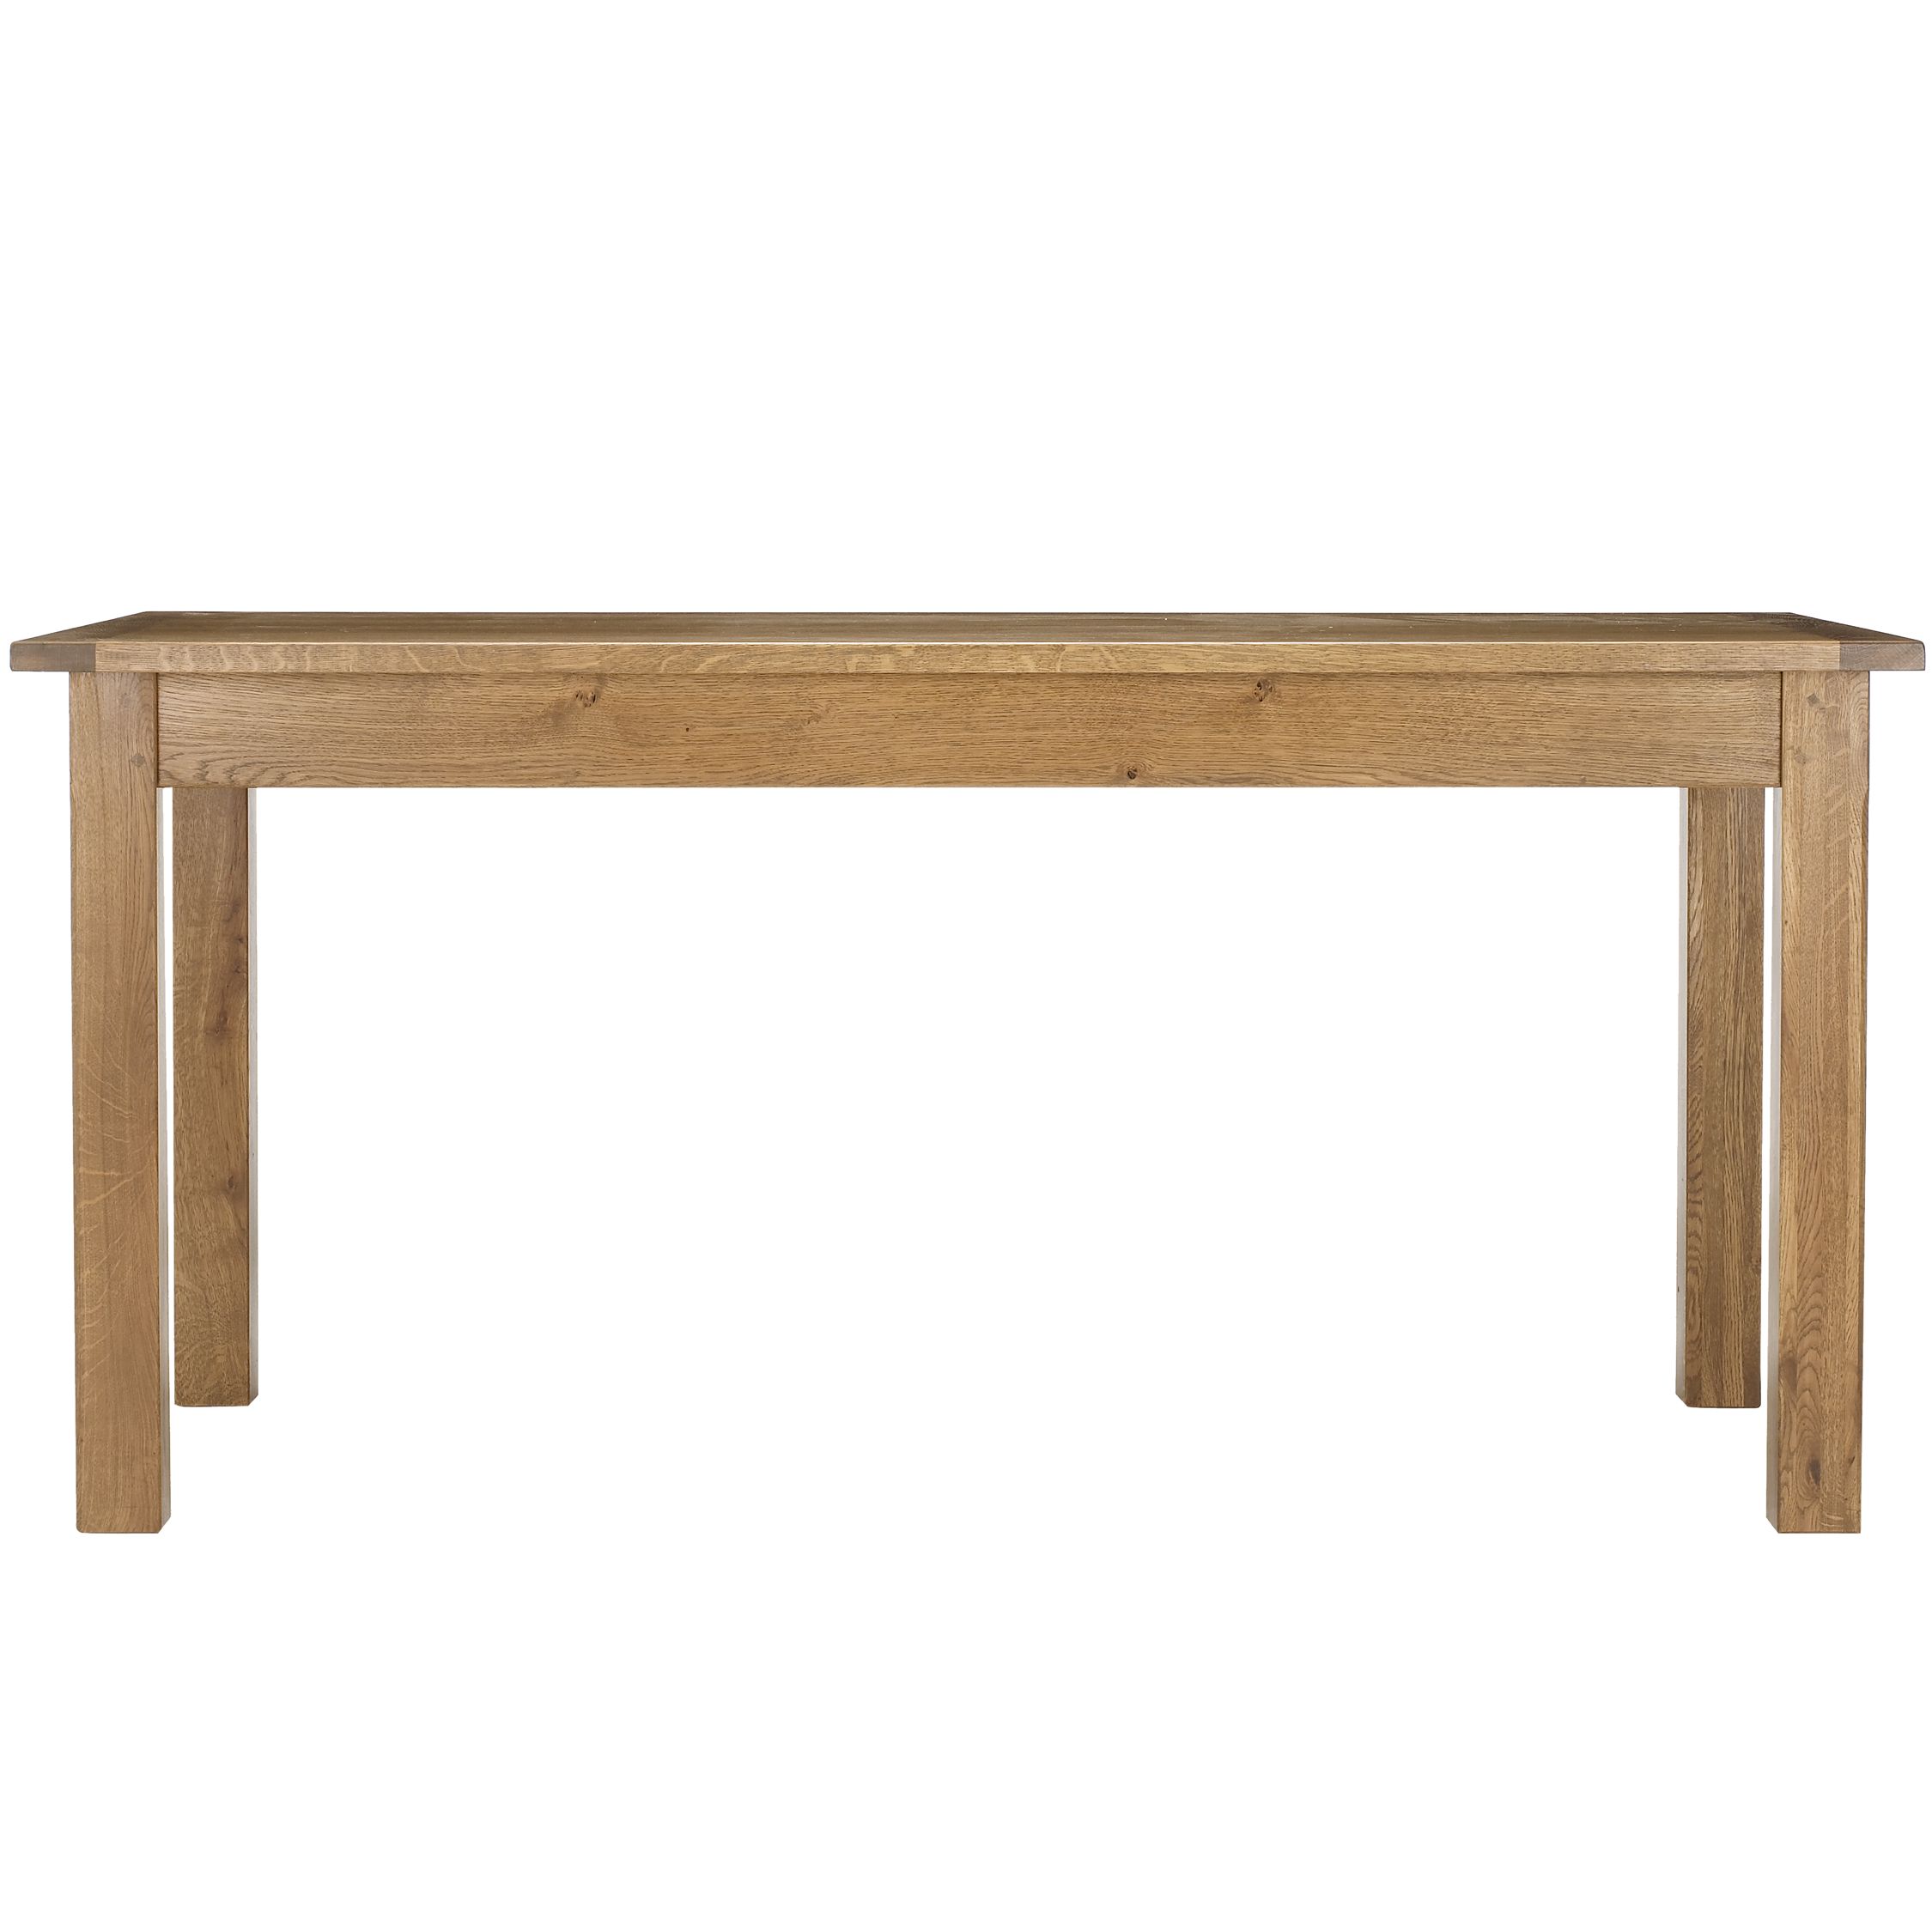 Ardennes Small Dining Table, Cognac at JohnLewis